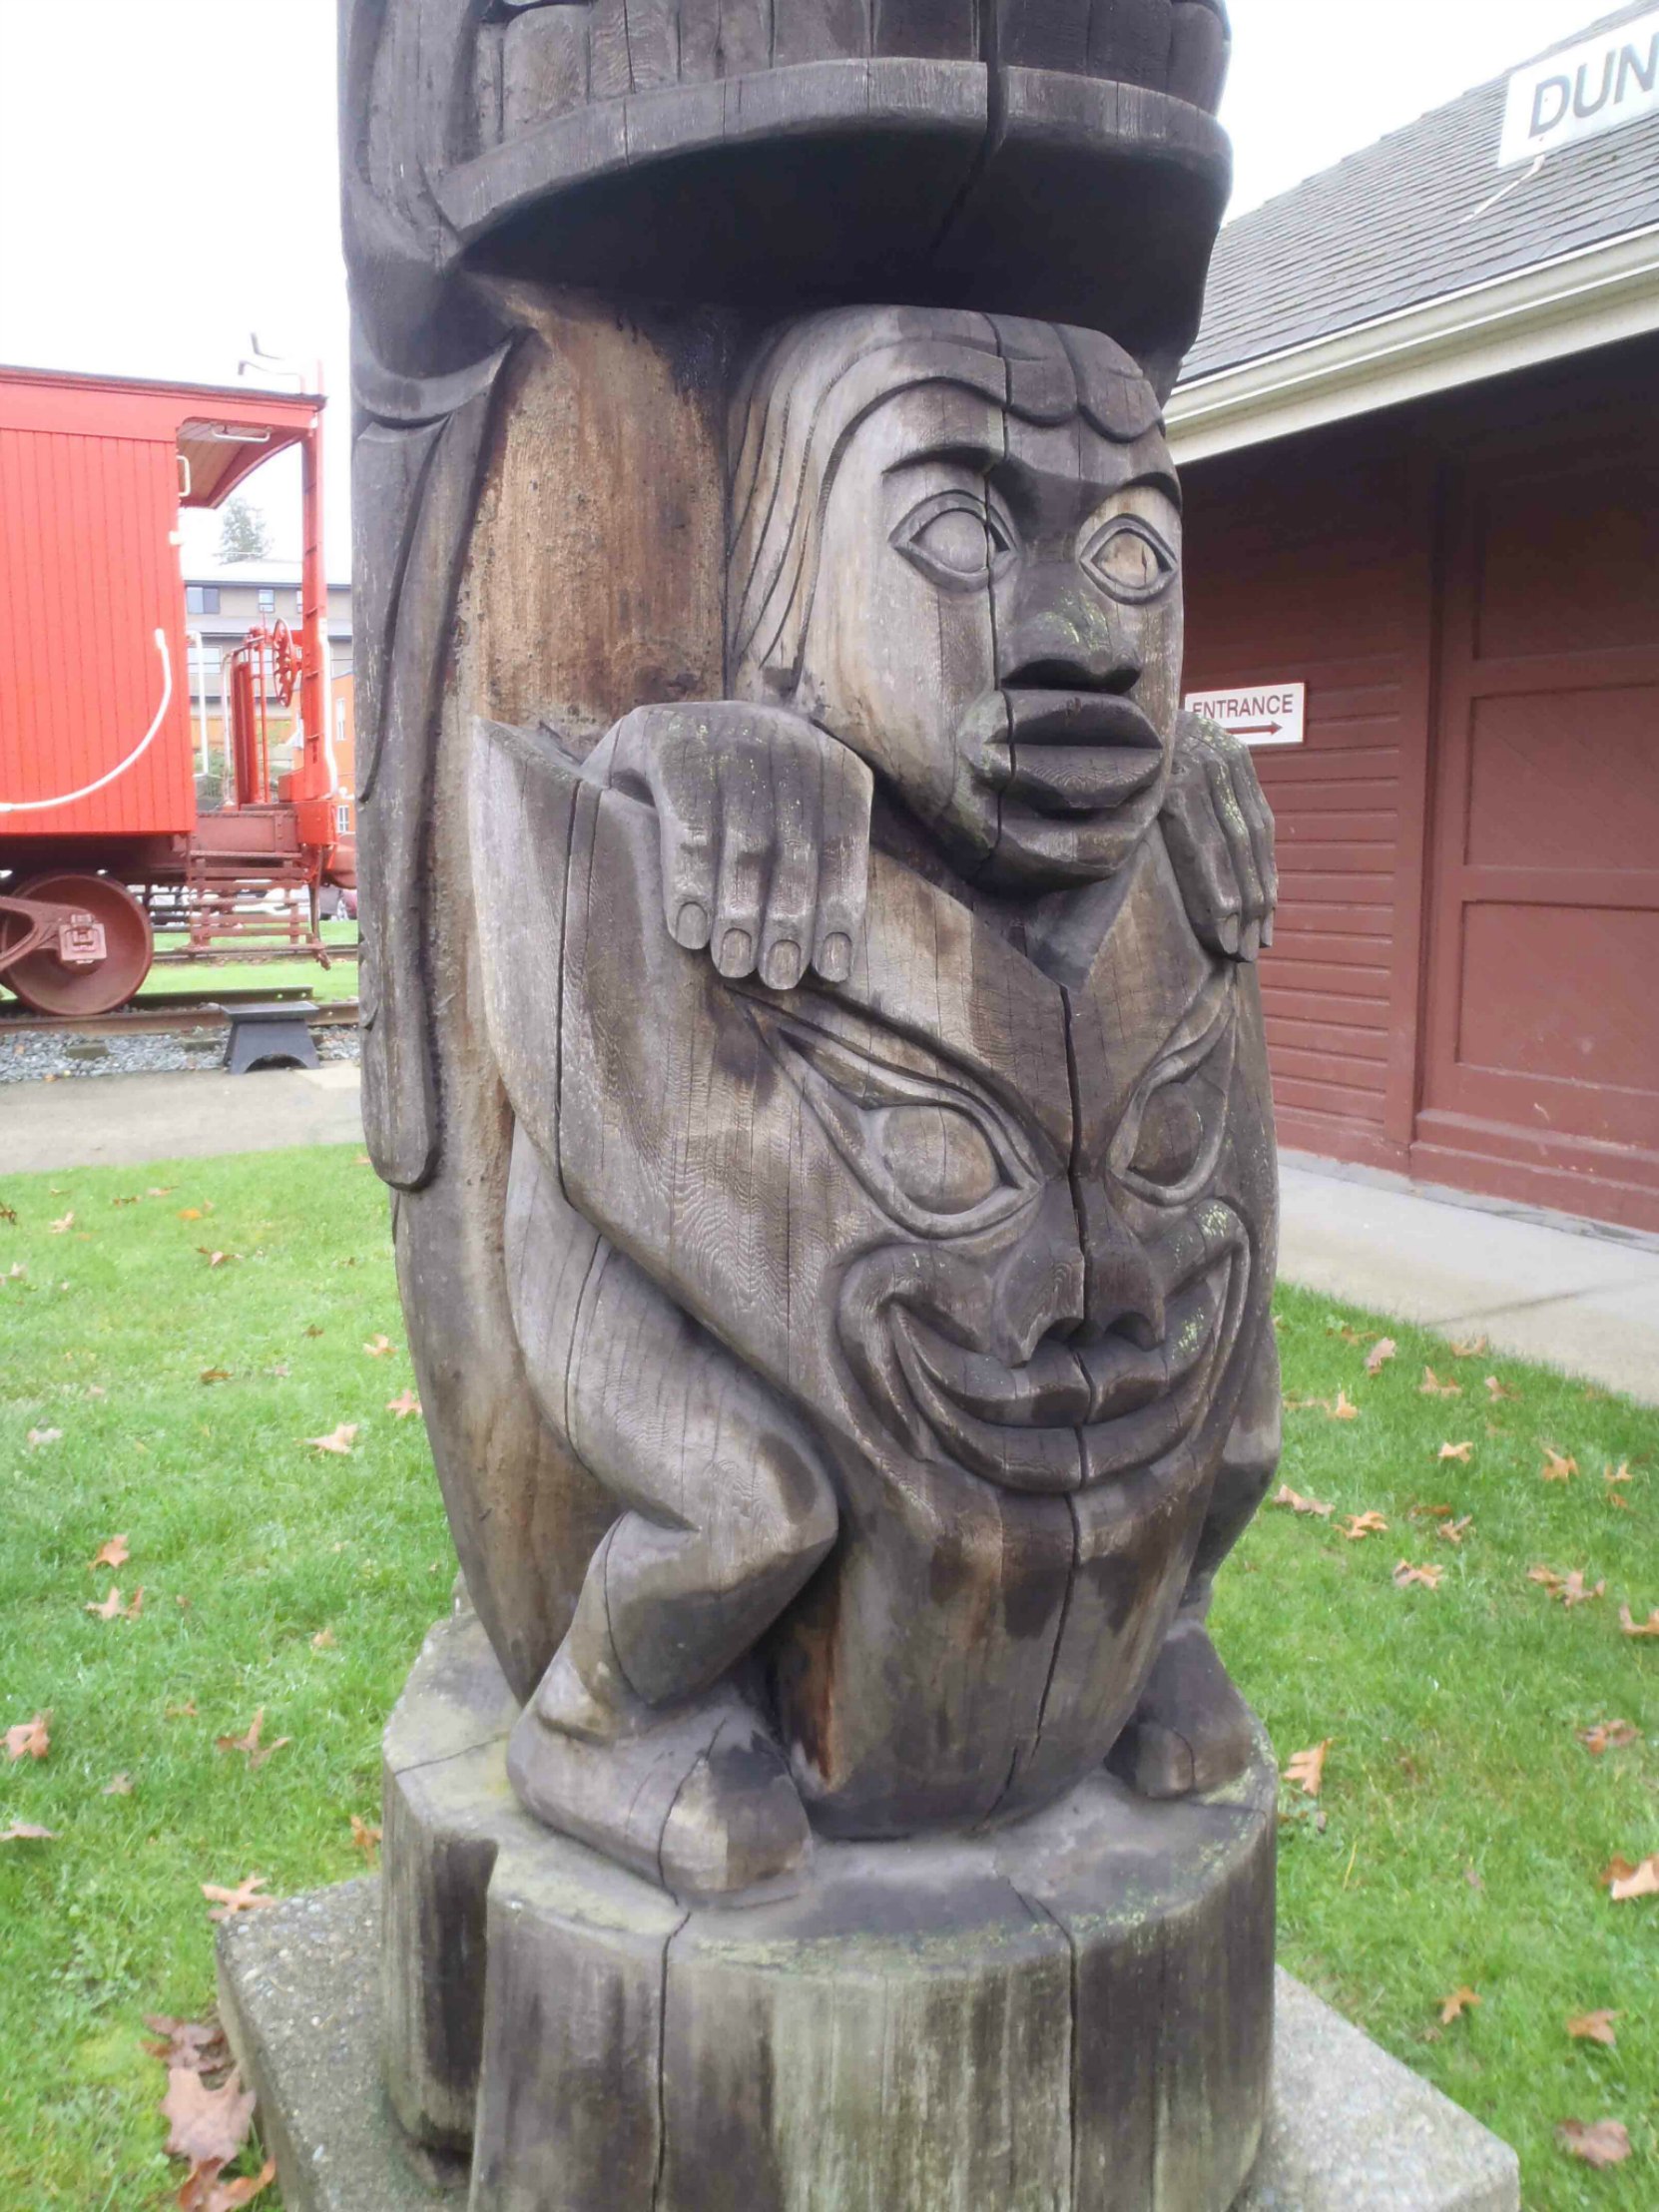 Transformation totem pole - Man and Wolf figure detail - Canada Avenue, Duncan